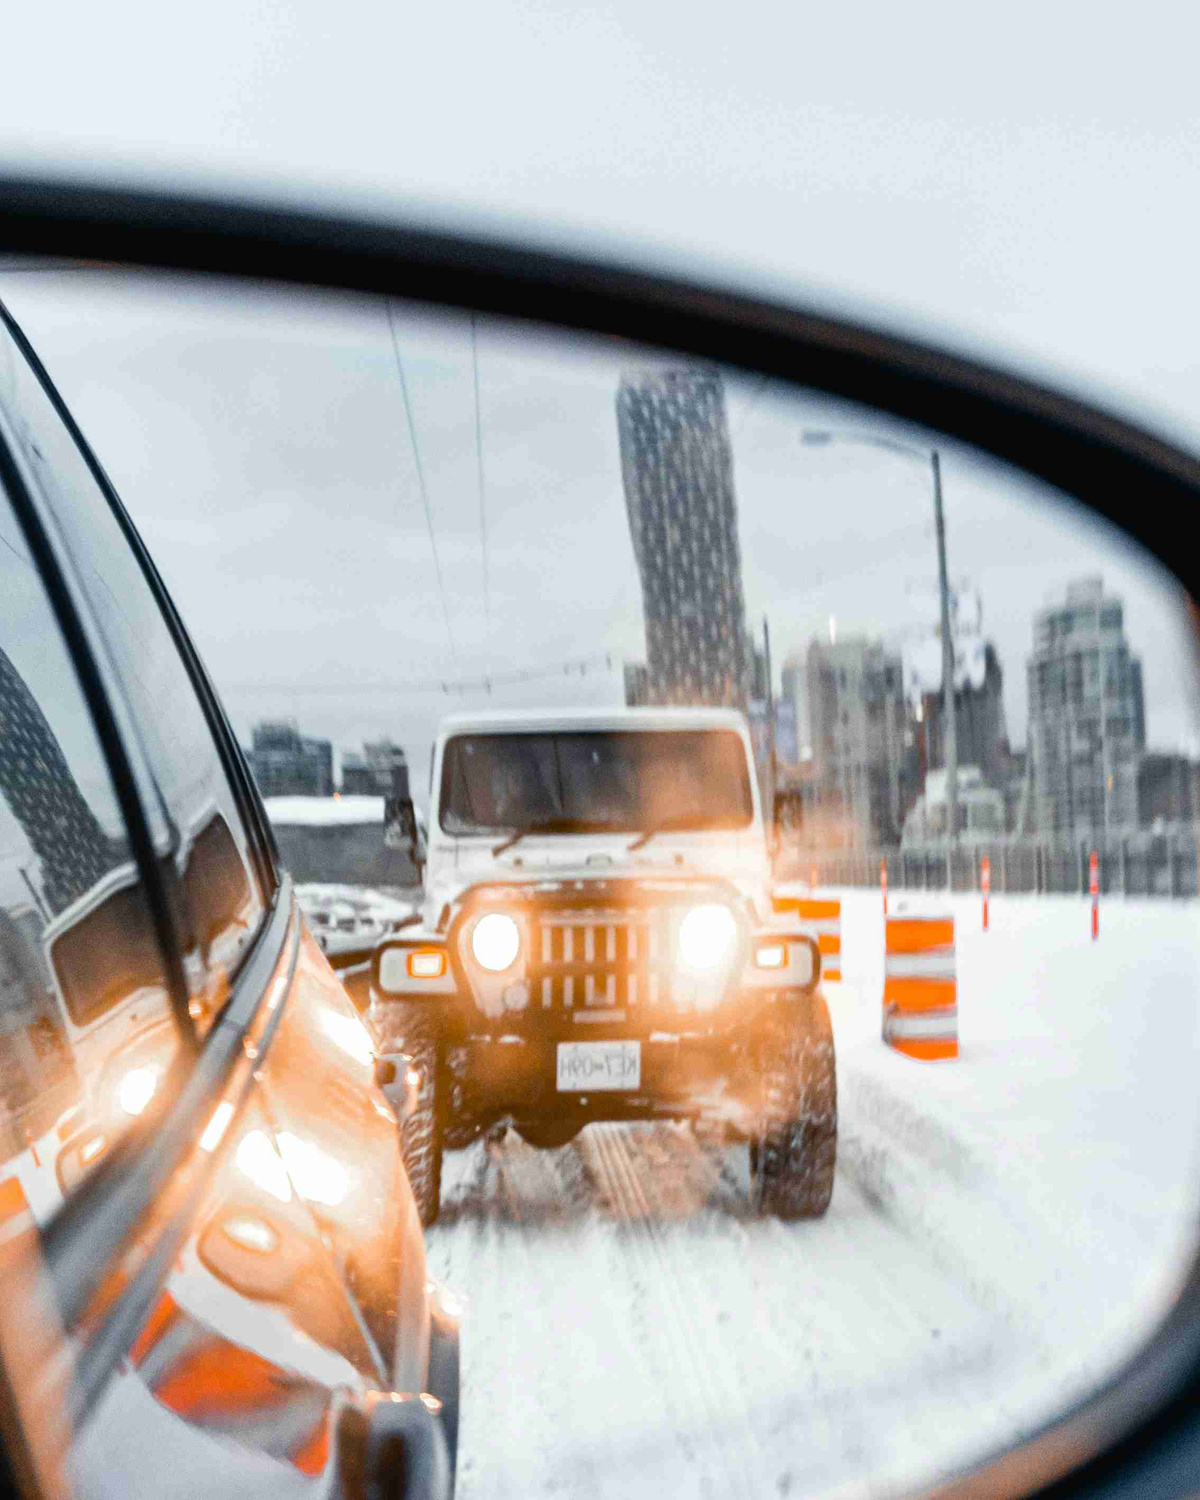 Winter_Road_Conditions_Through_Side_Mirror_Reflection